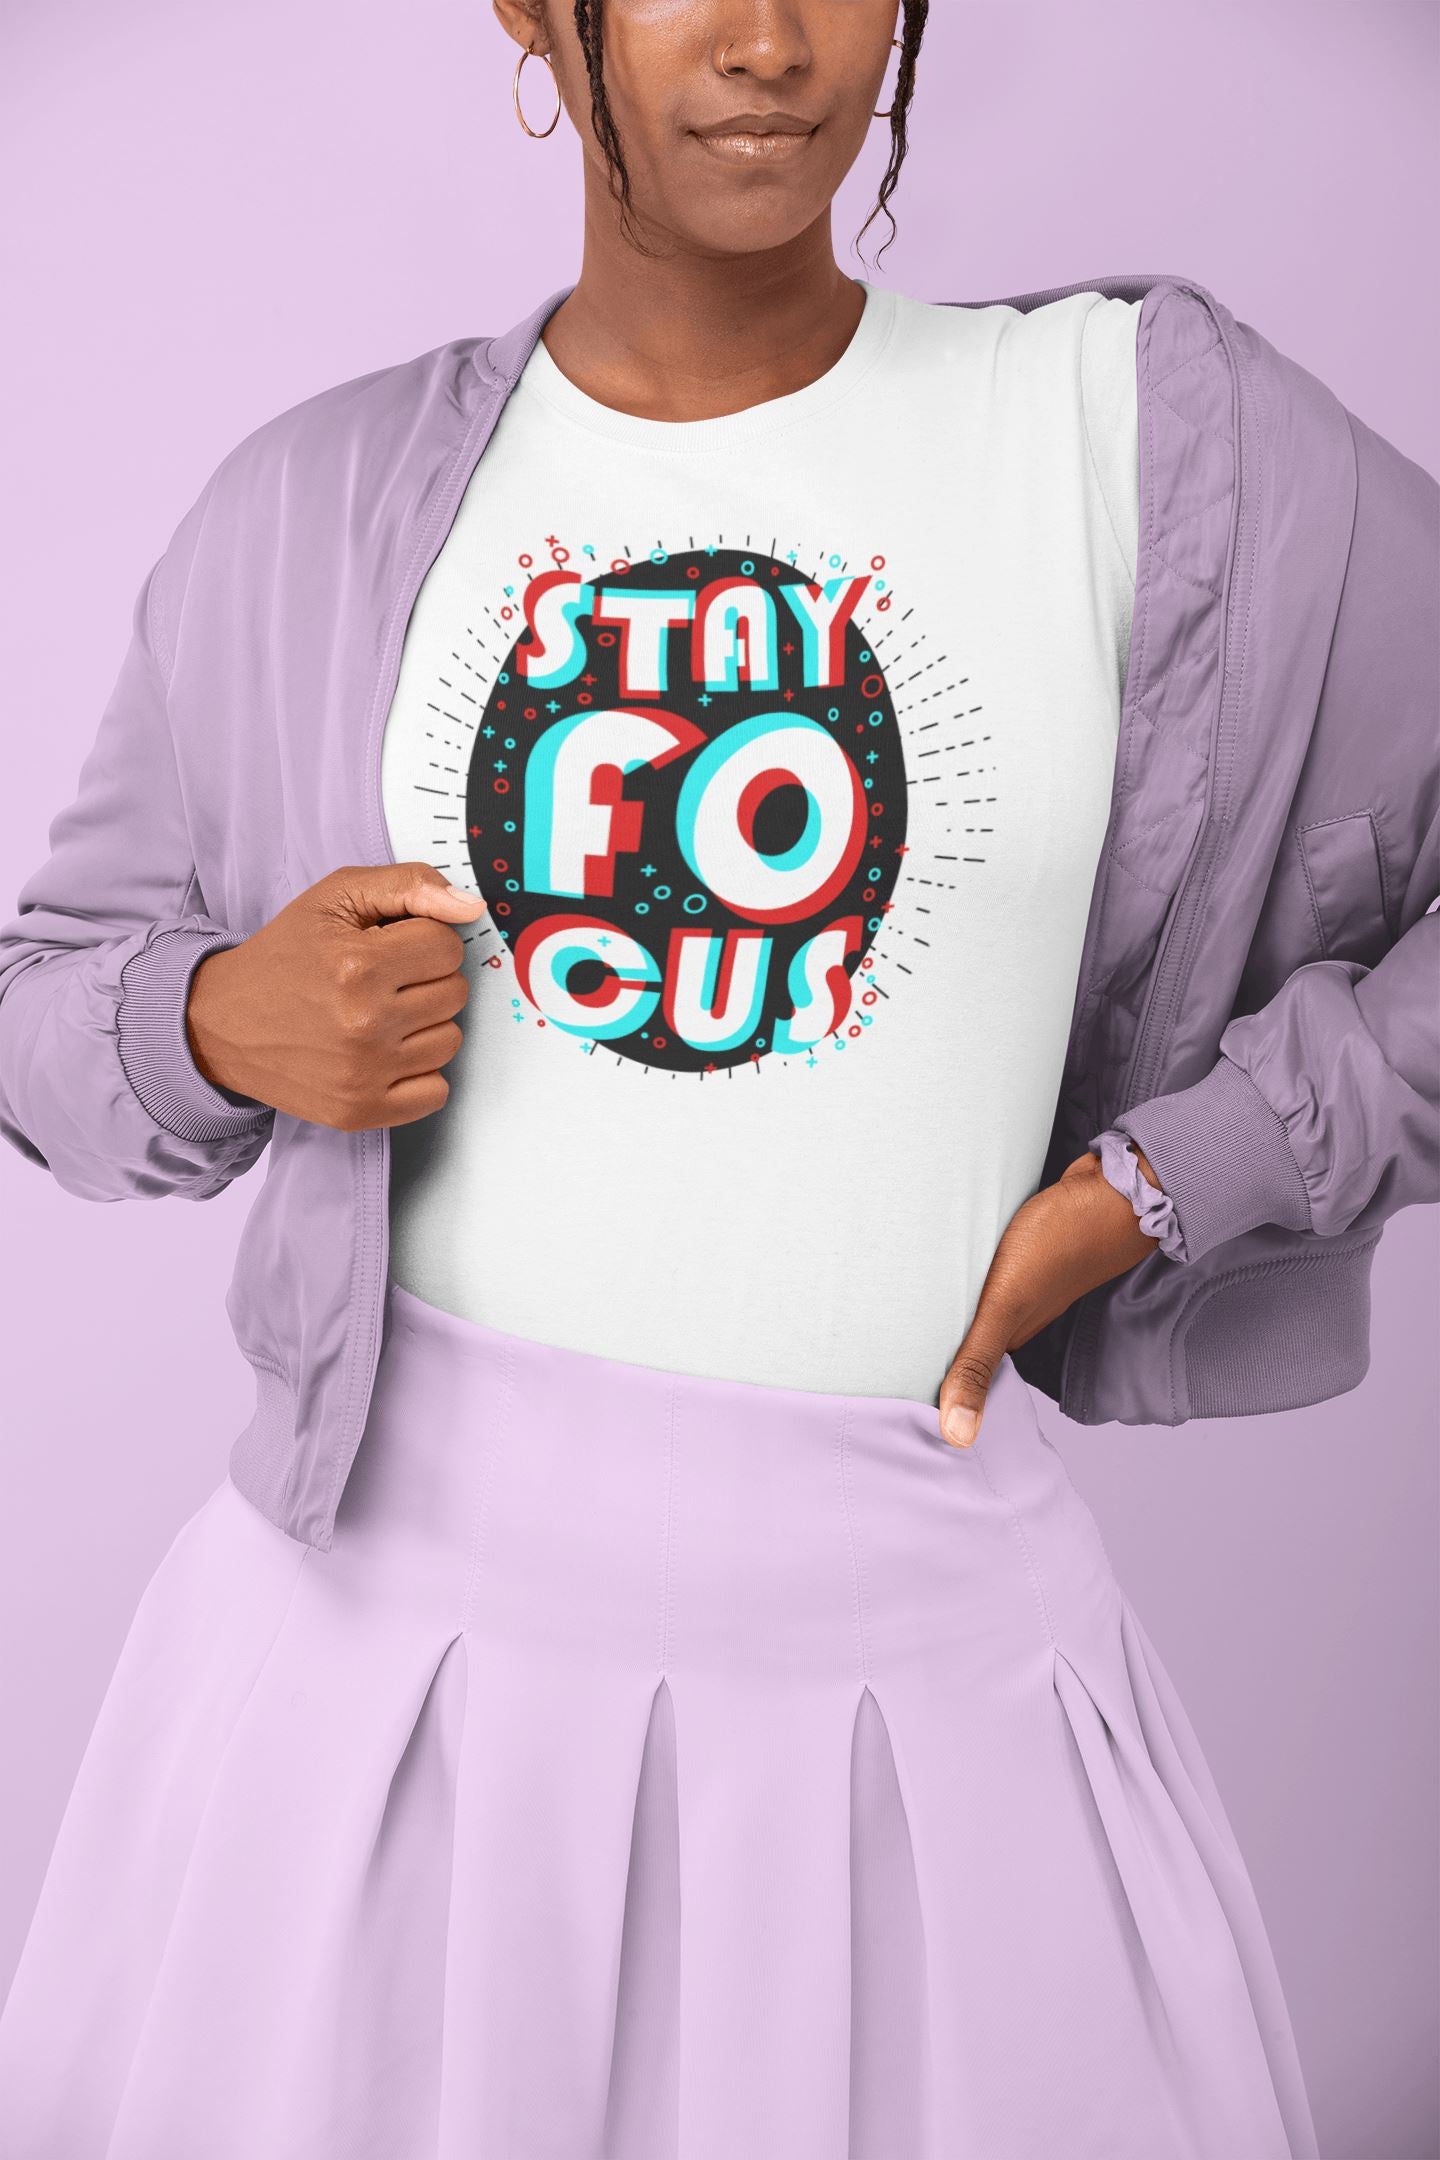 Stay Focus Supreme T Shirt for Men and Women freeshipping - Catch